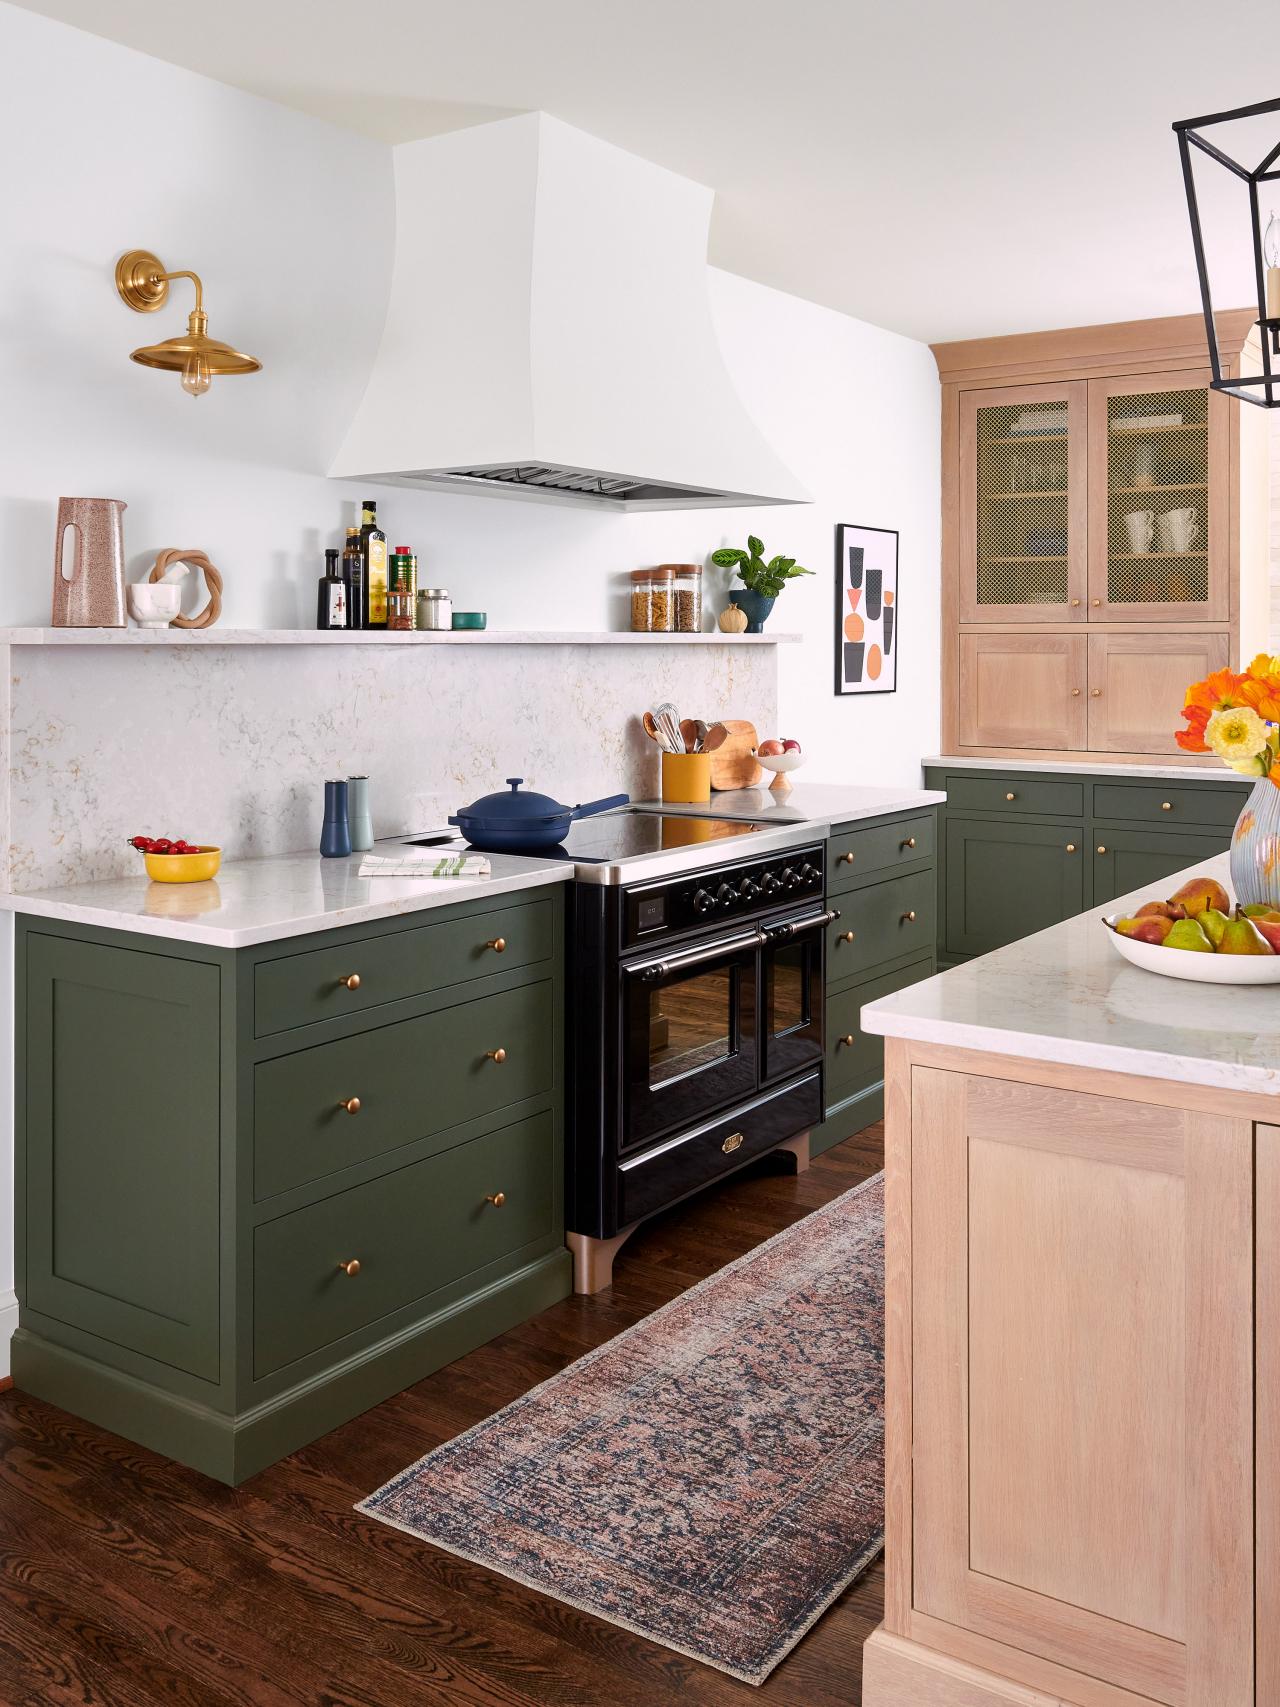 Tour a Traditional Green Kitchen With Two Tone Cabinets   HGTV